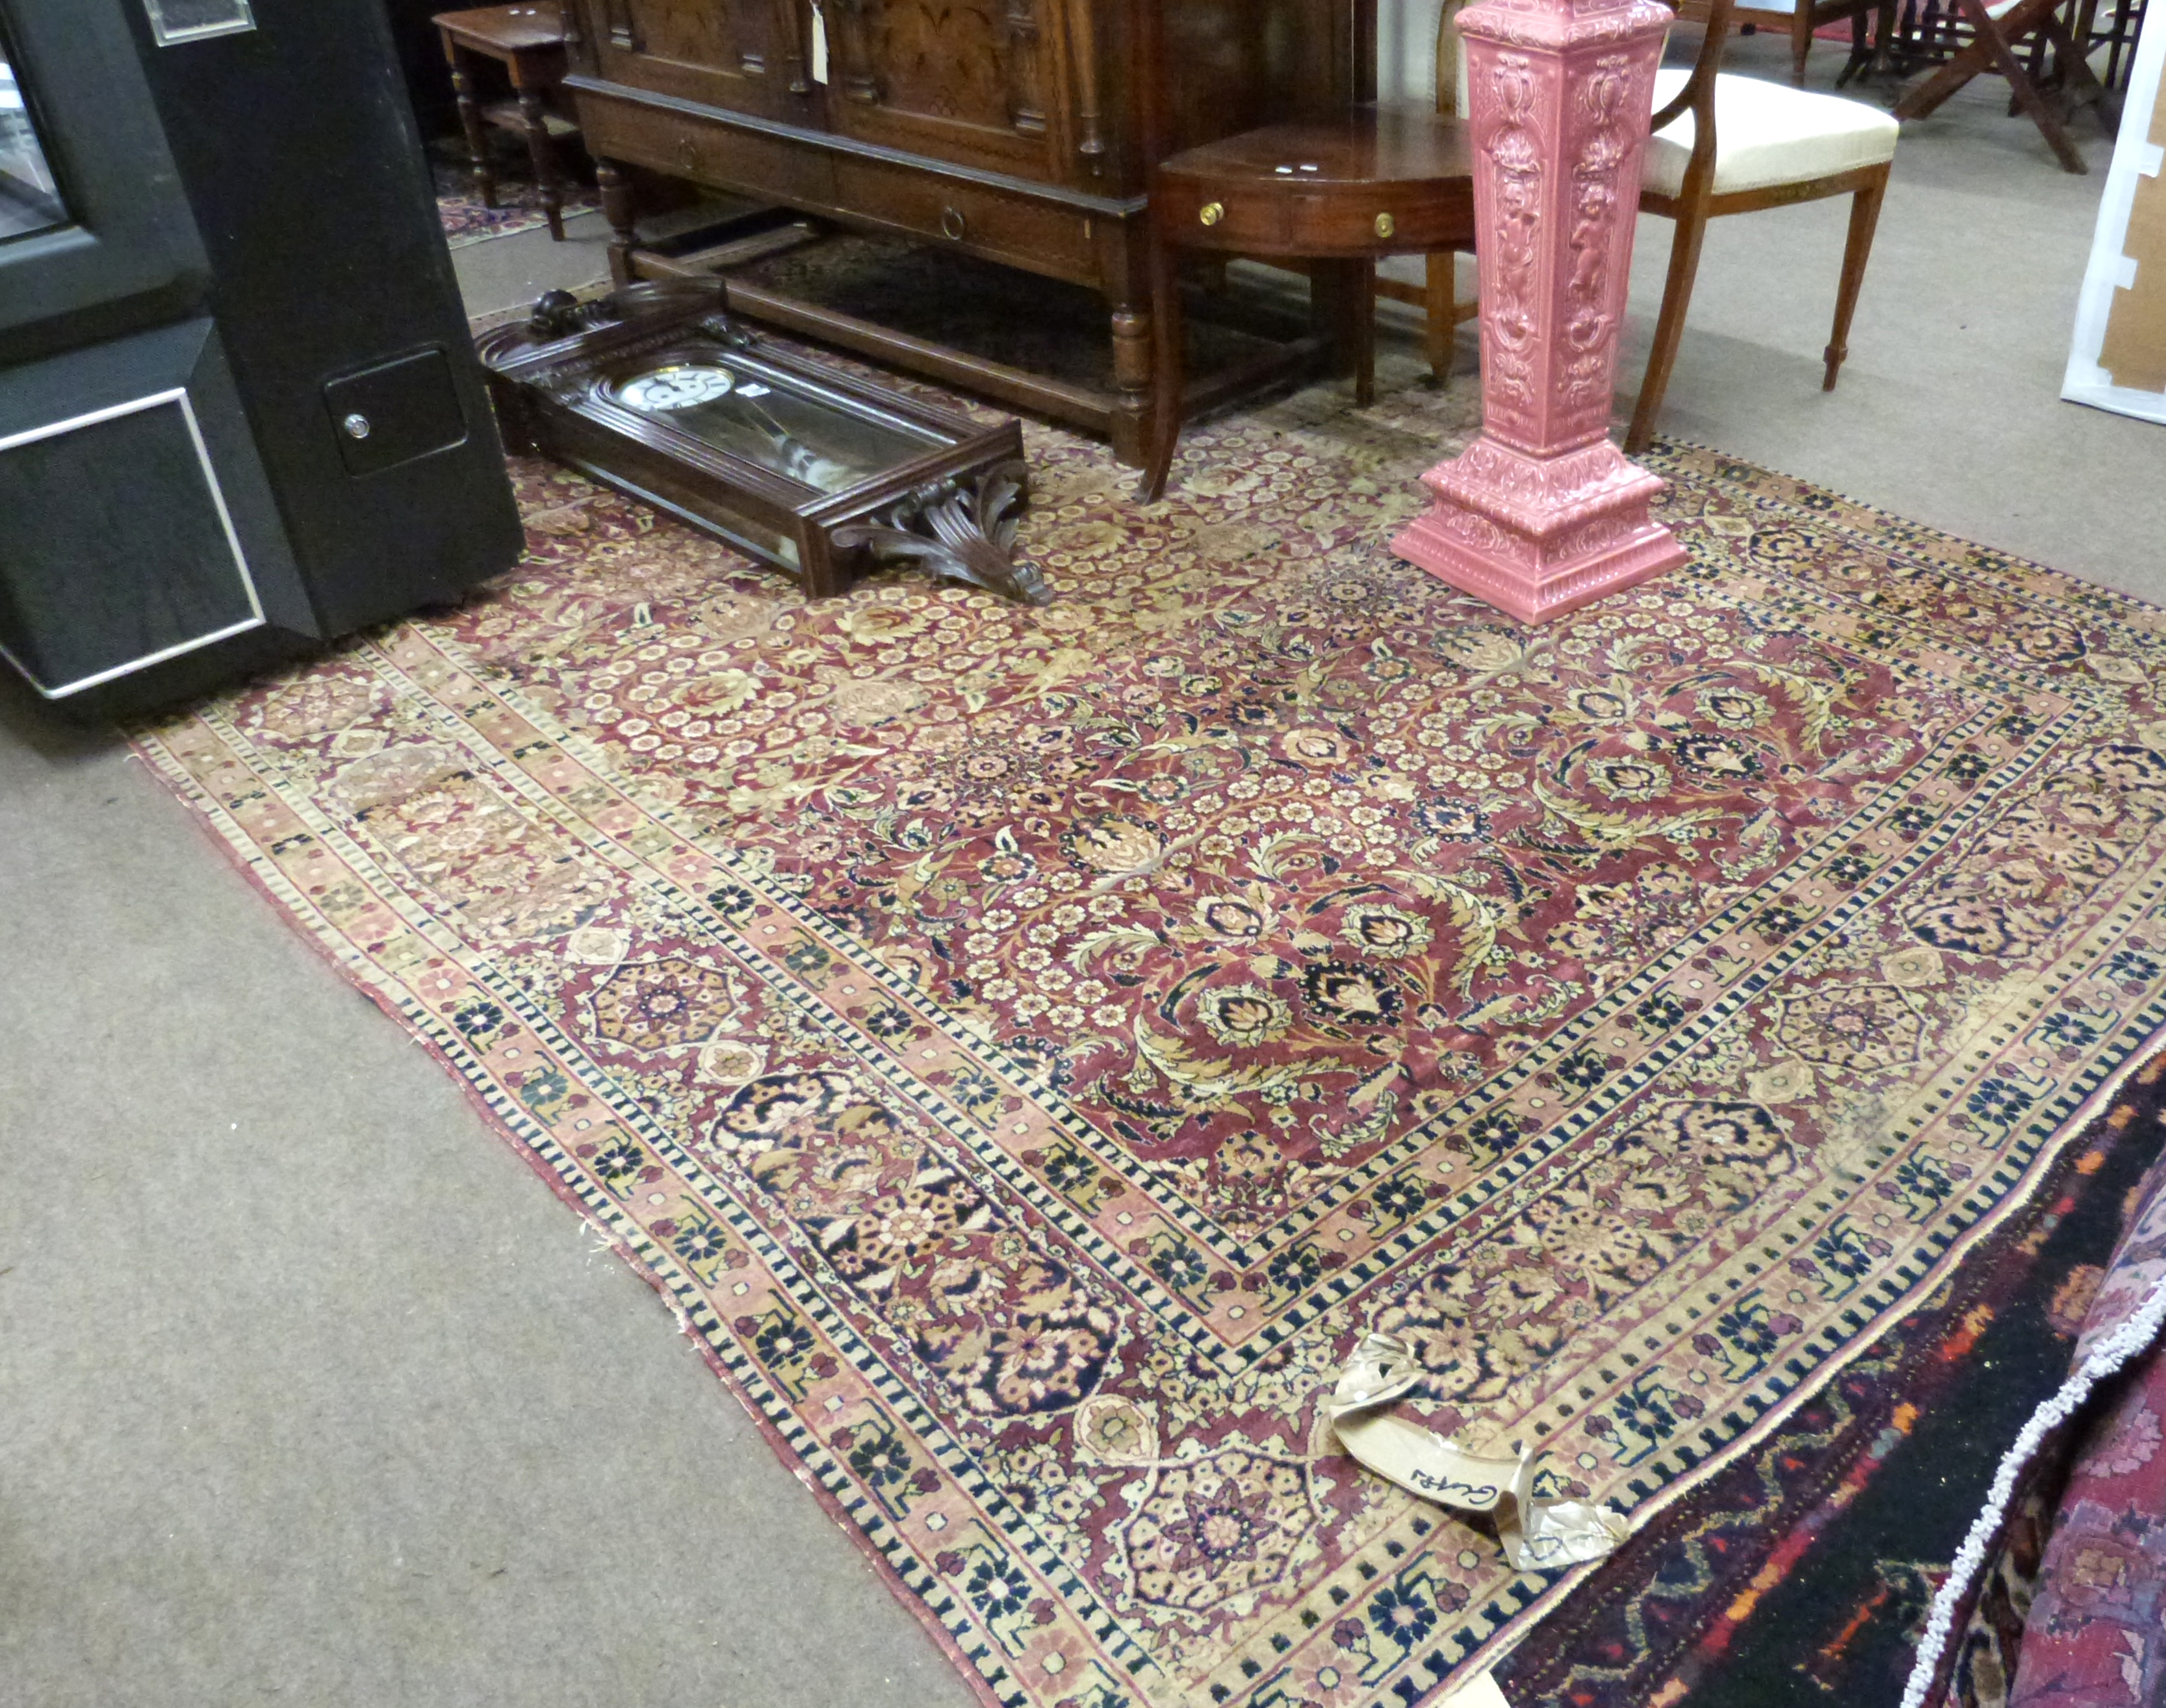 Vintage silk carpet, red and pink ground, single gulled border, medallion and floral design, 11 x